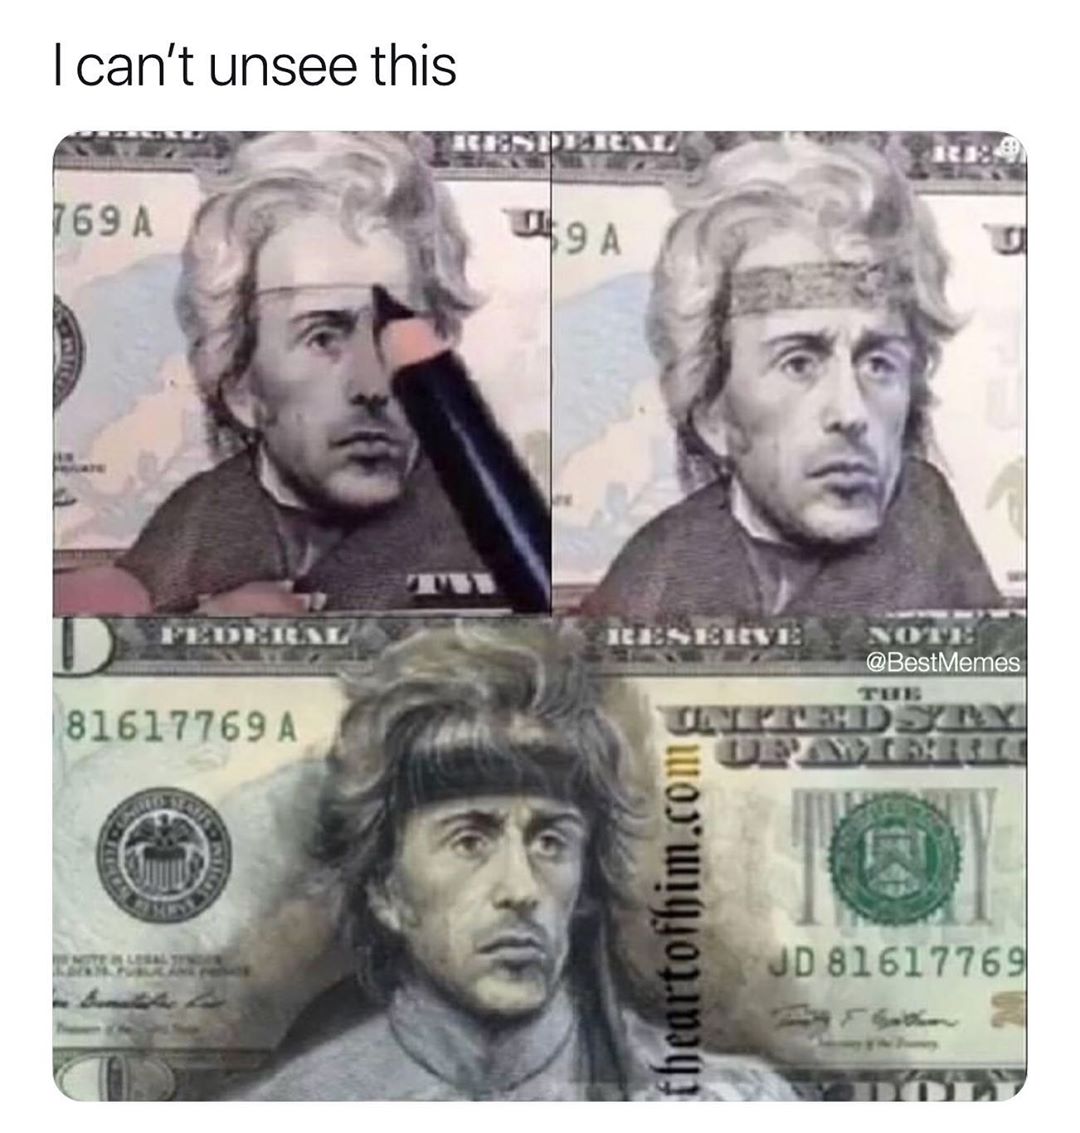 andrew jackson rambo - I can't unsee this 10SE 769A 19 A Federni Reserve Memes Tube 81617769 A theartofhim.com Jd 81617769